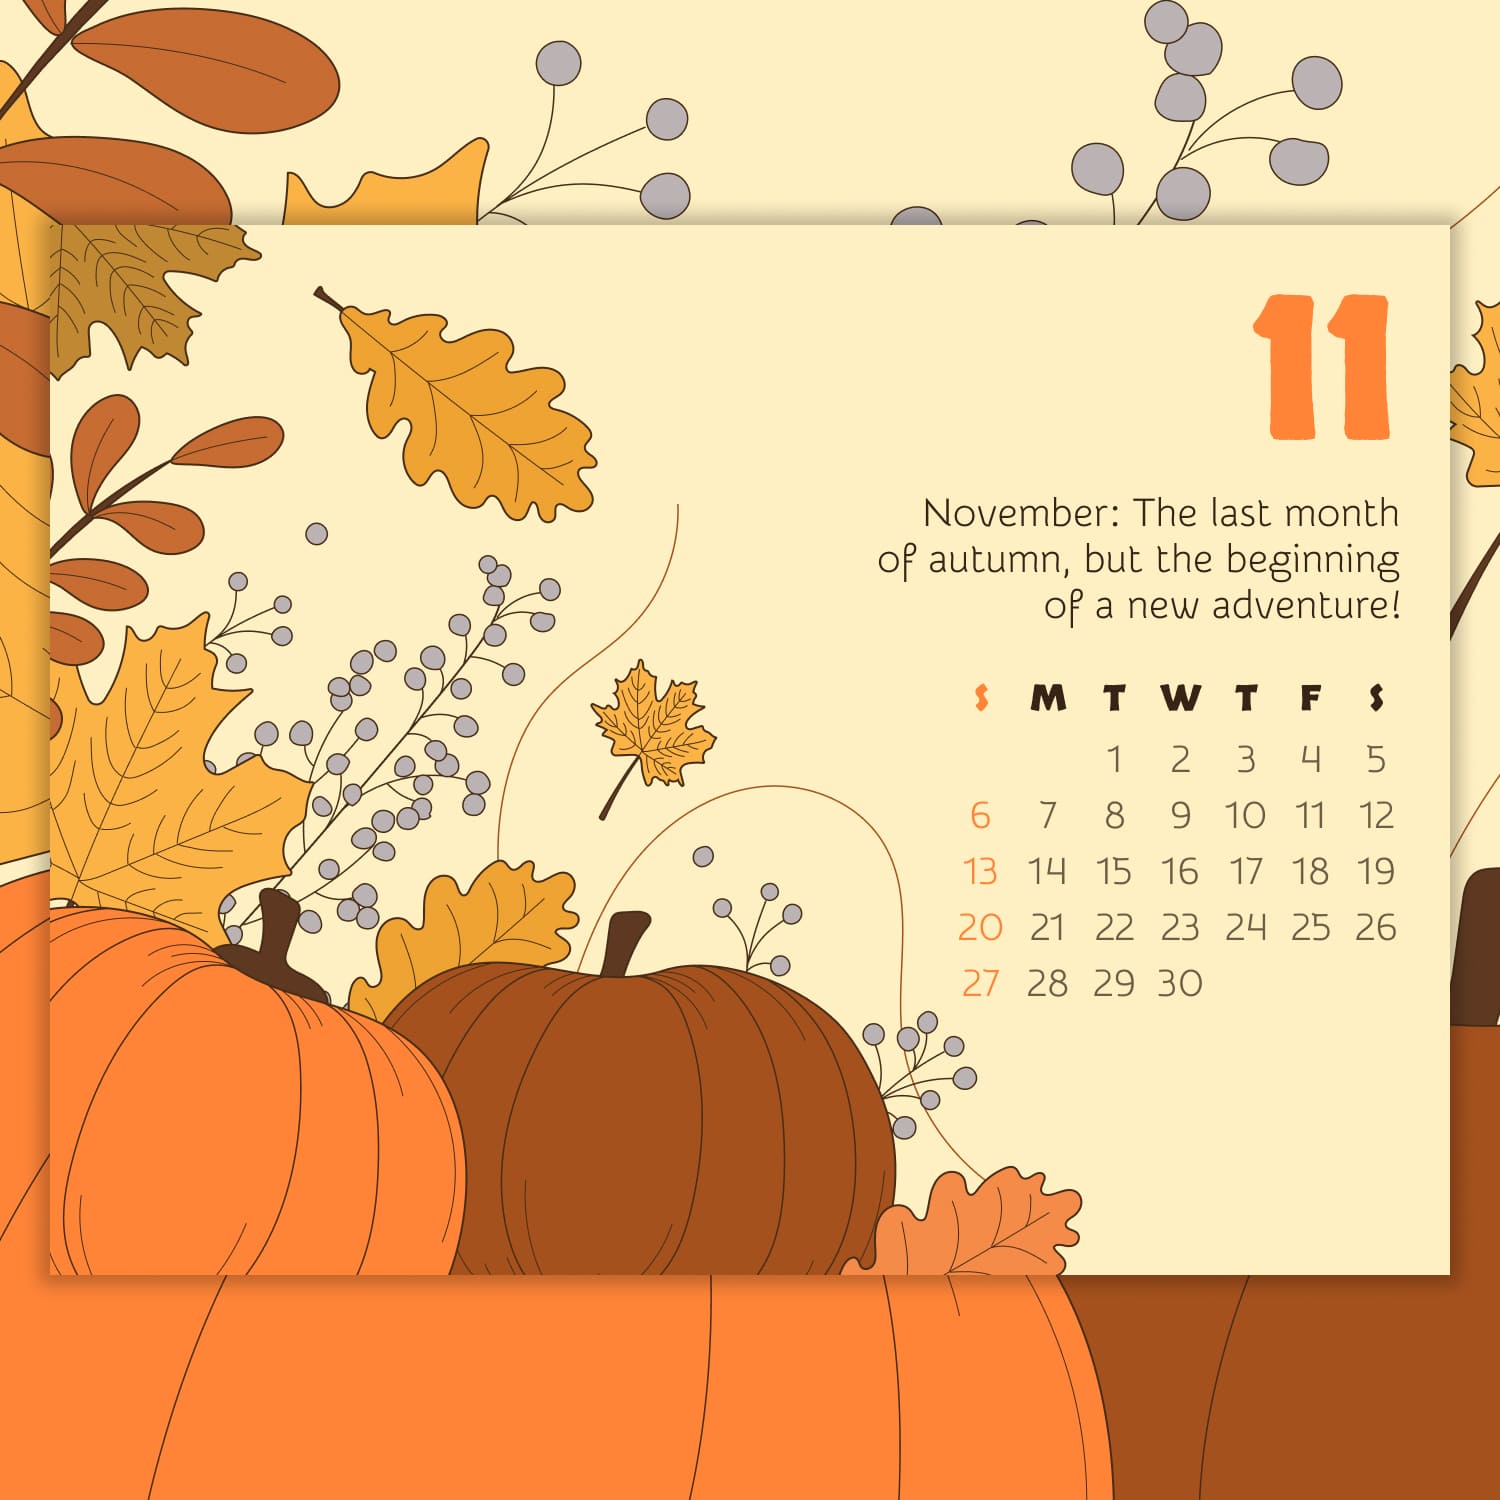 Calendar November in the picture size 1500x1500.